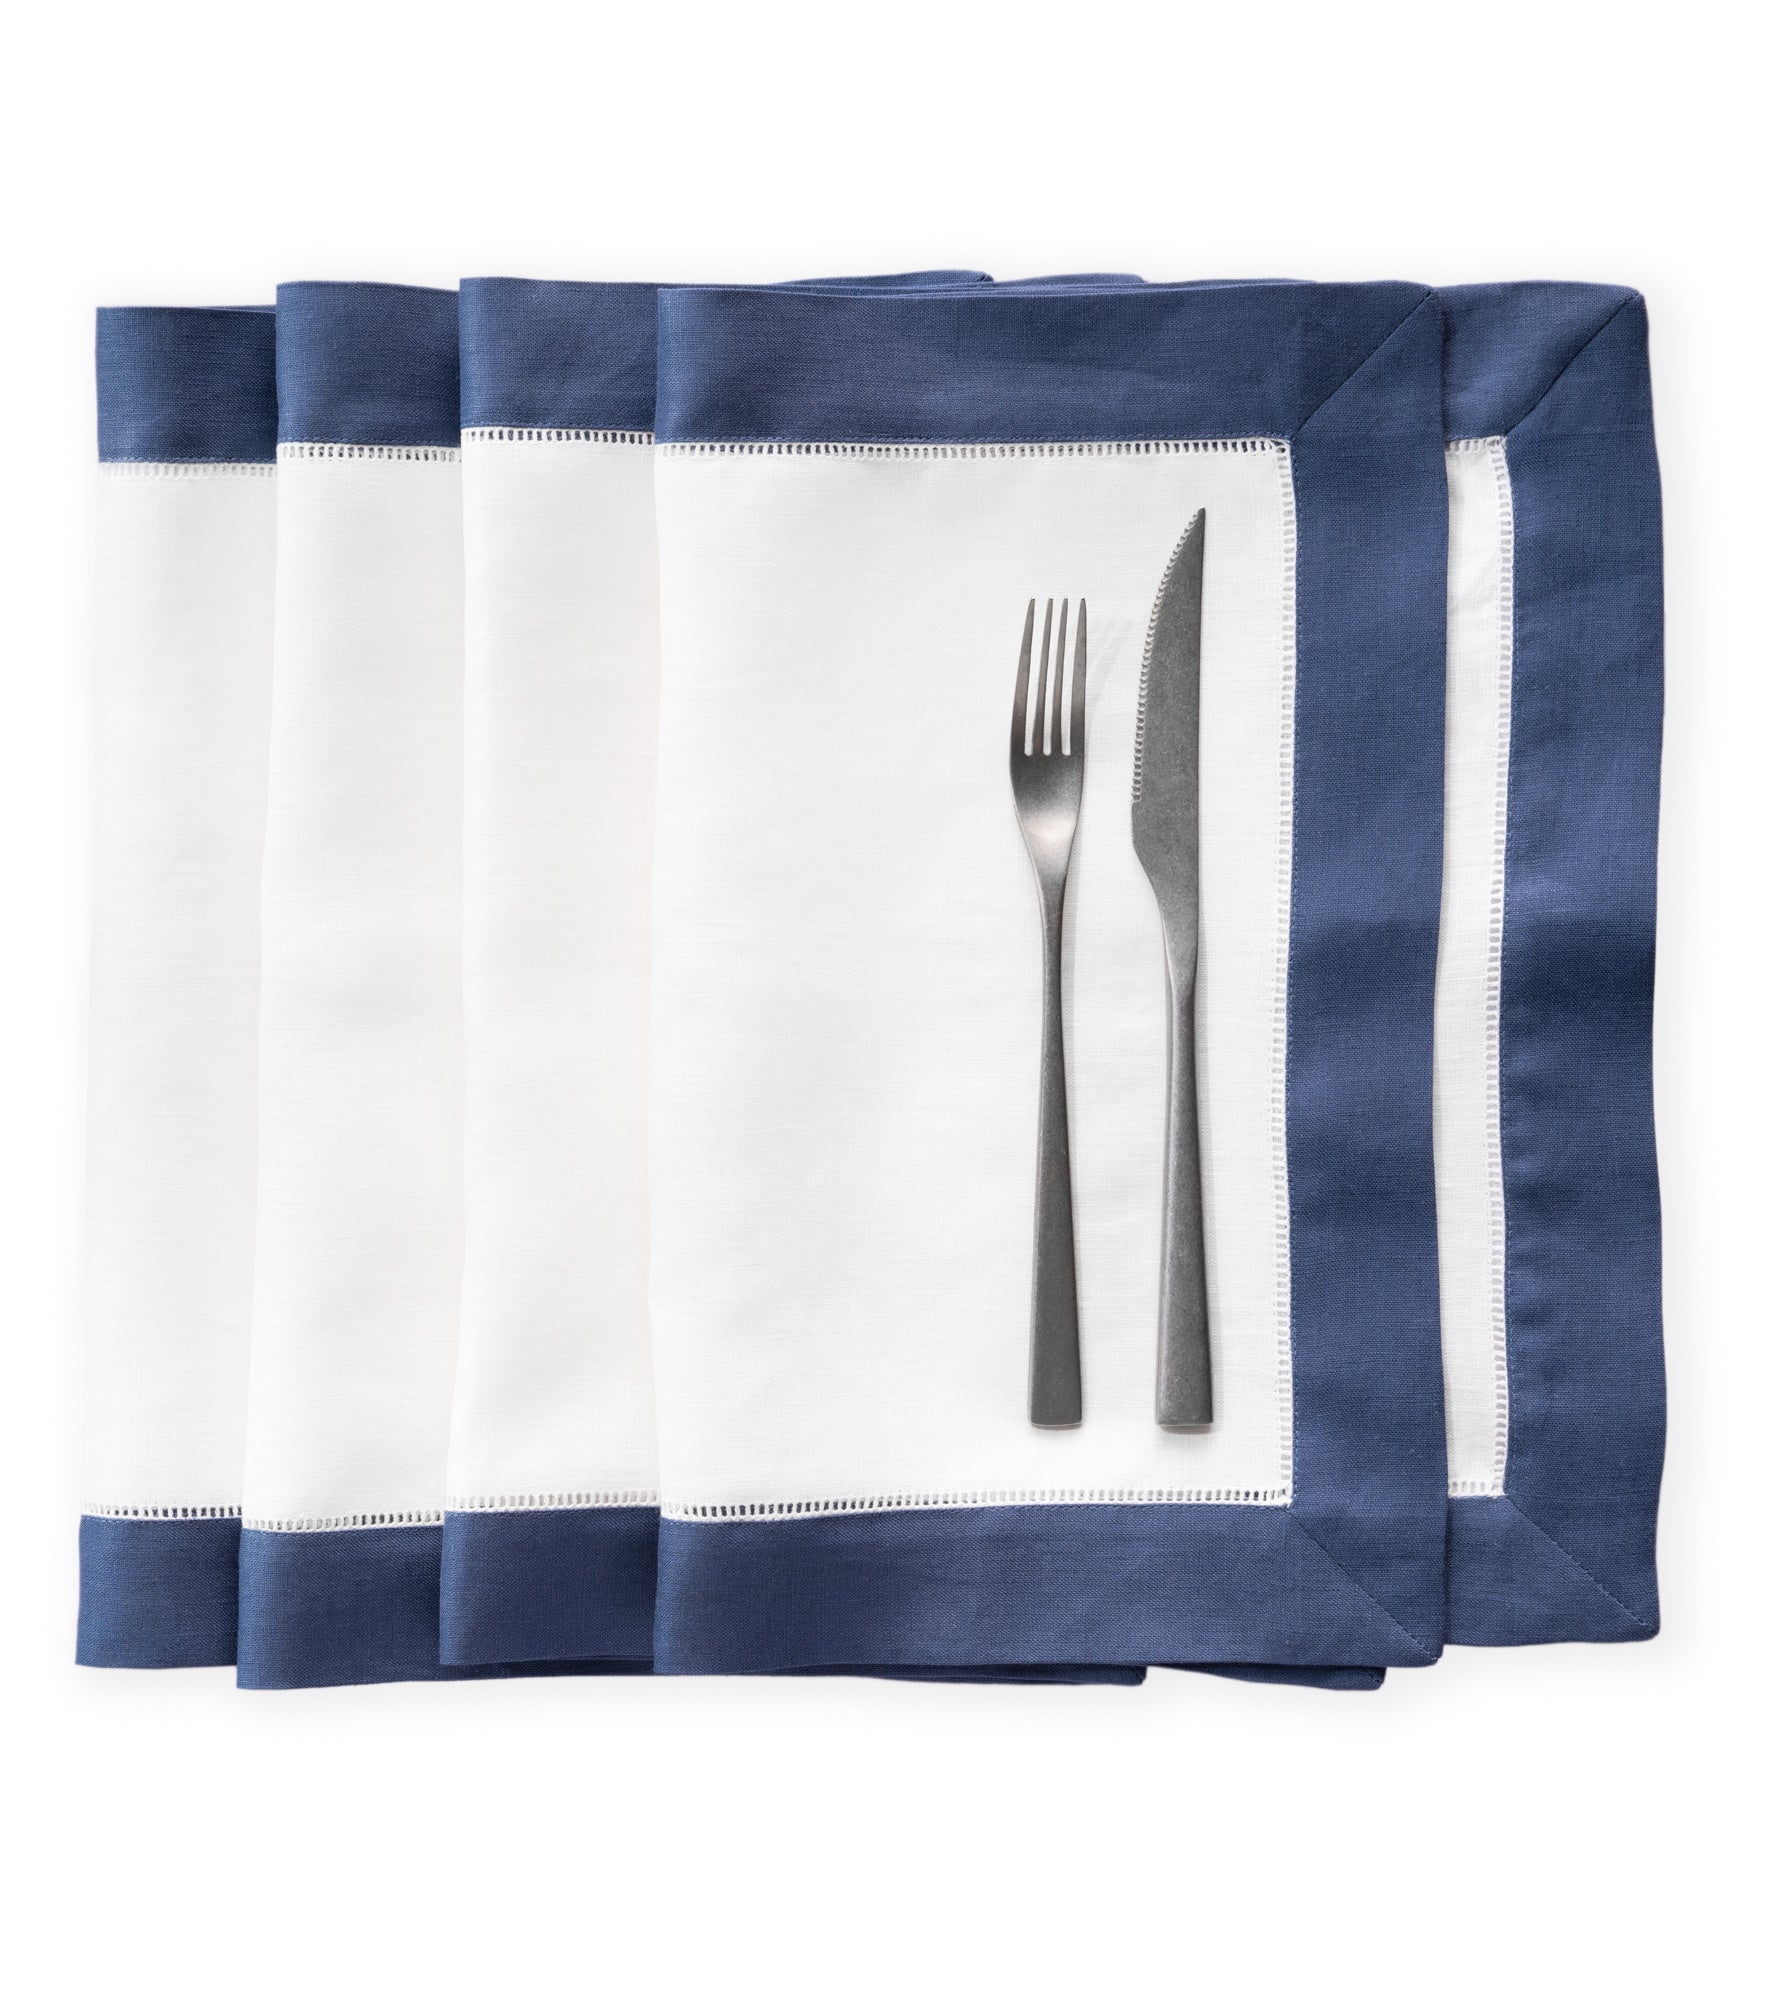 Seletti Milky Boots placemats (set of four) - Blue